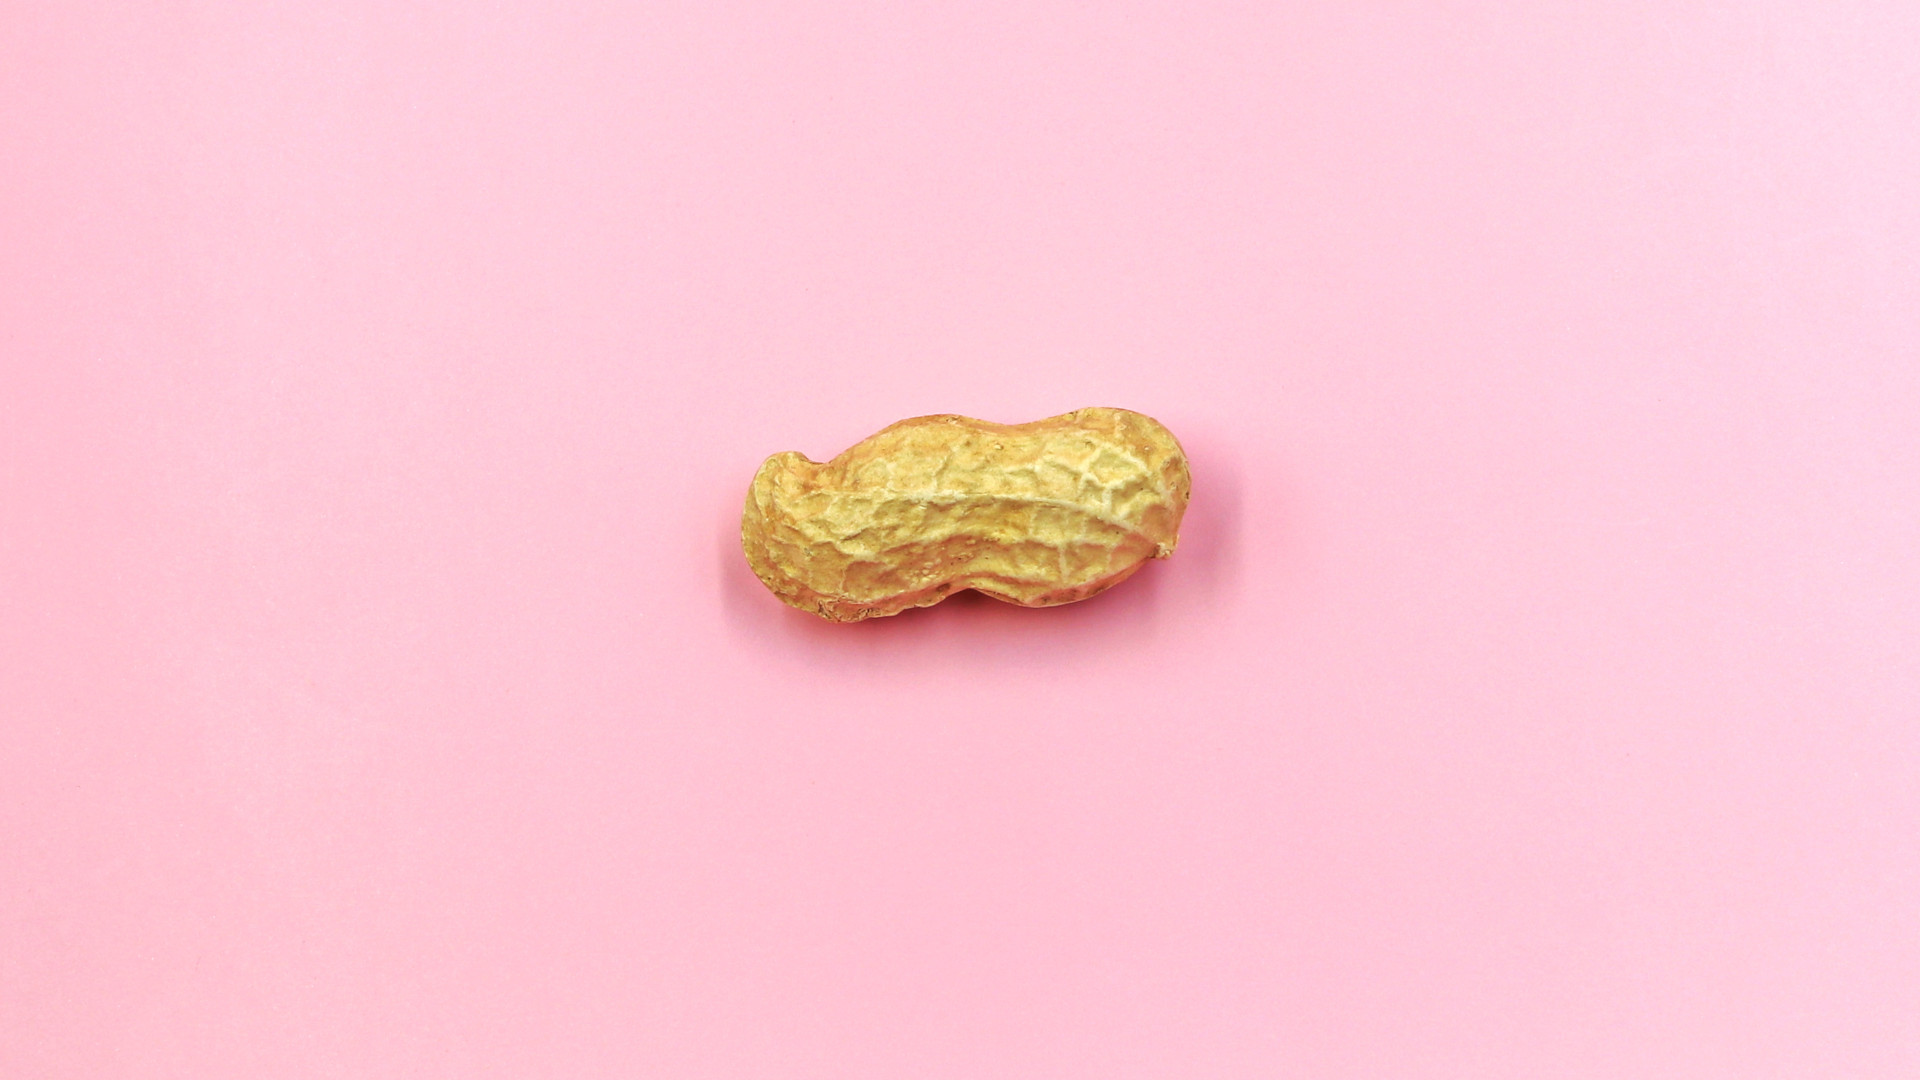 Peanut isolated on pink background. Food allergy concept